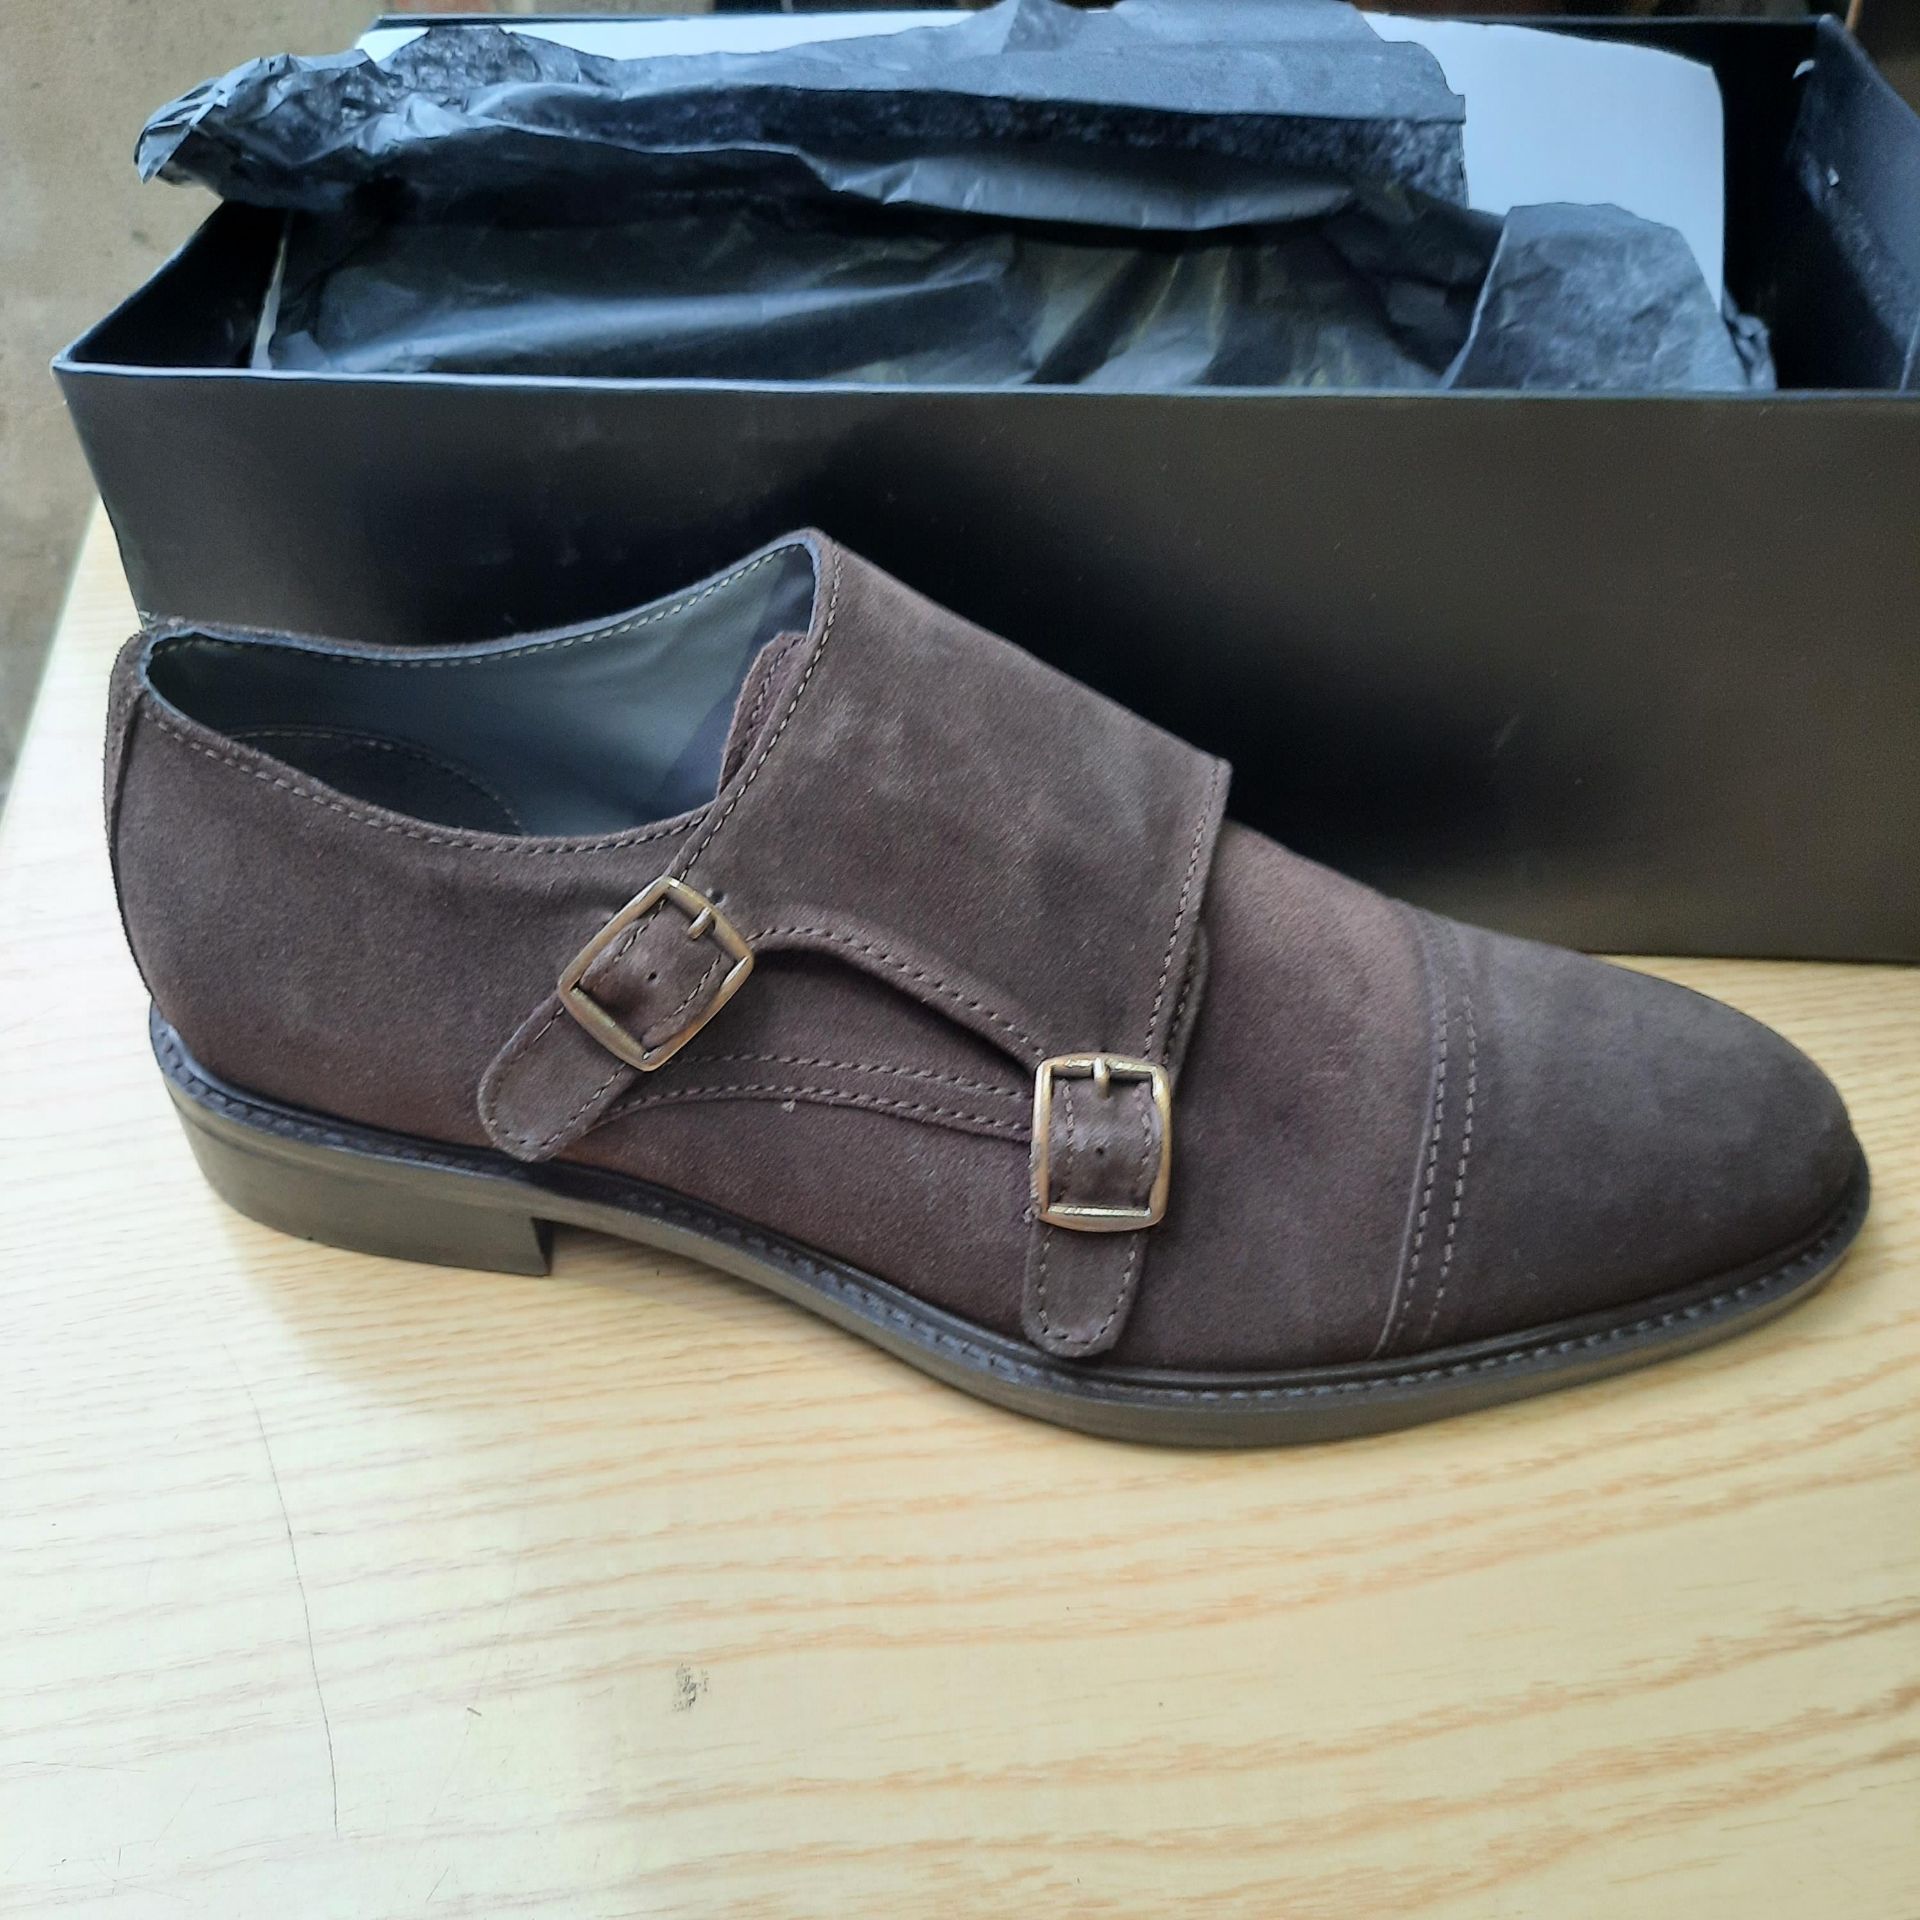 NEW & BOXED BROWN MORLEY MONK GENTLEMANS SHOES SIZE UK - 6/ EU - 40/ US -7 BY TOPMAN. RRP £39.99